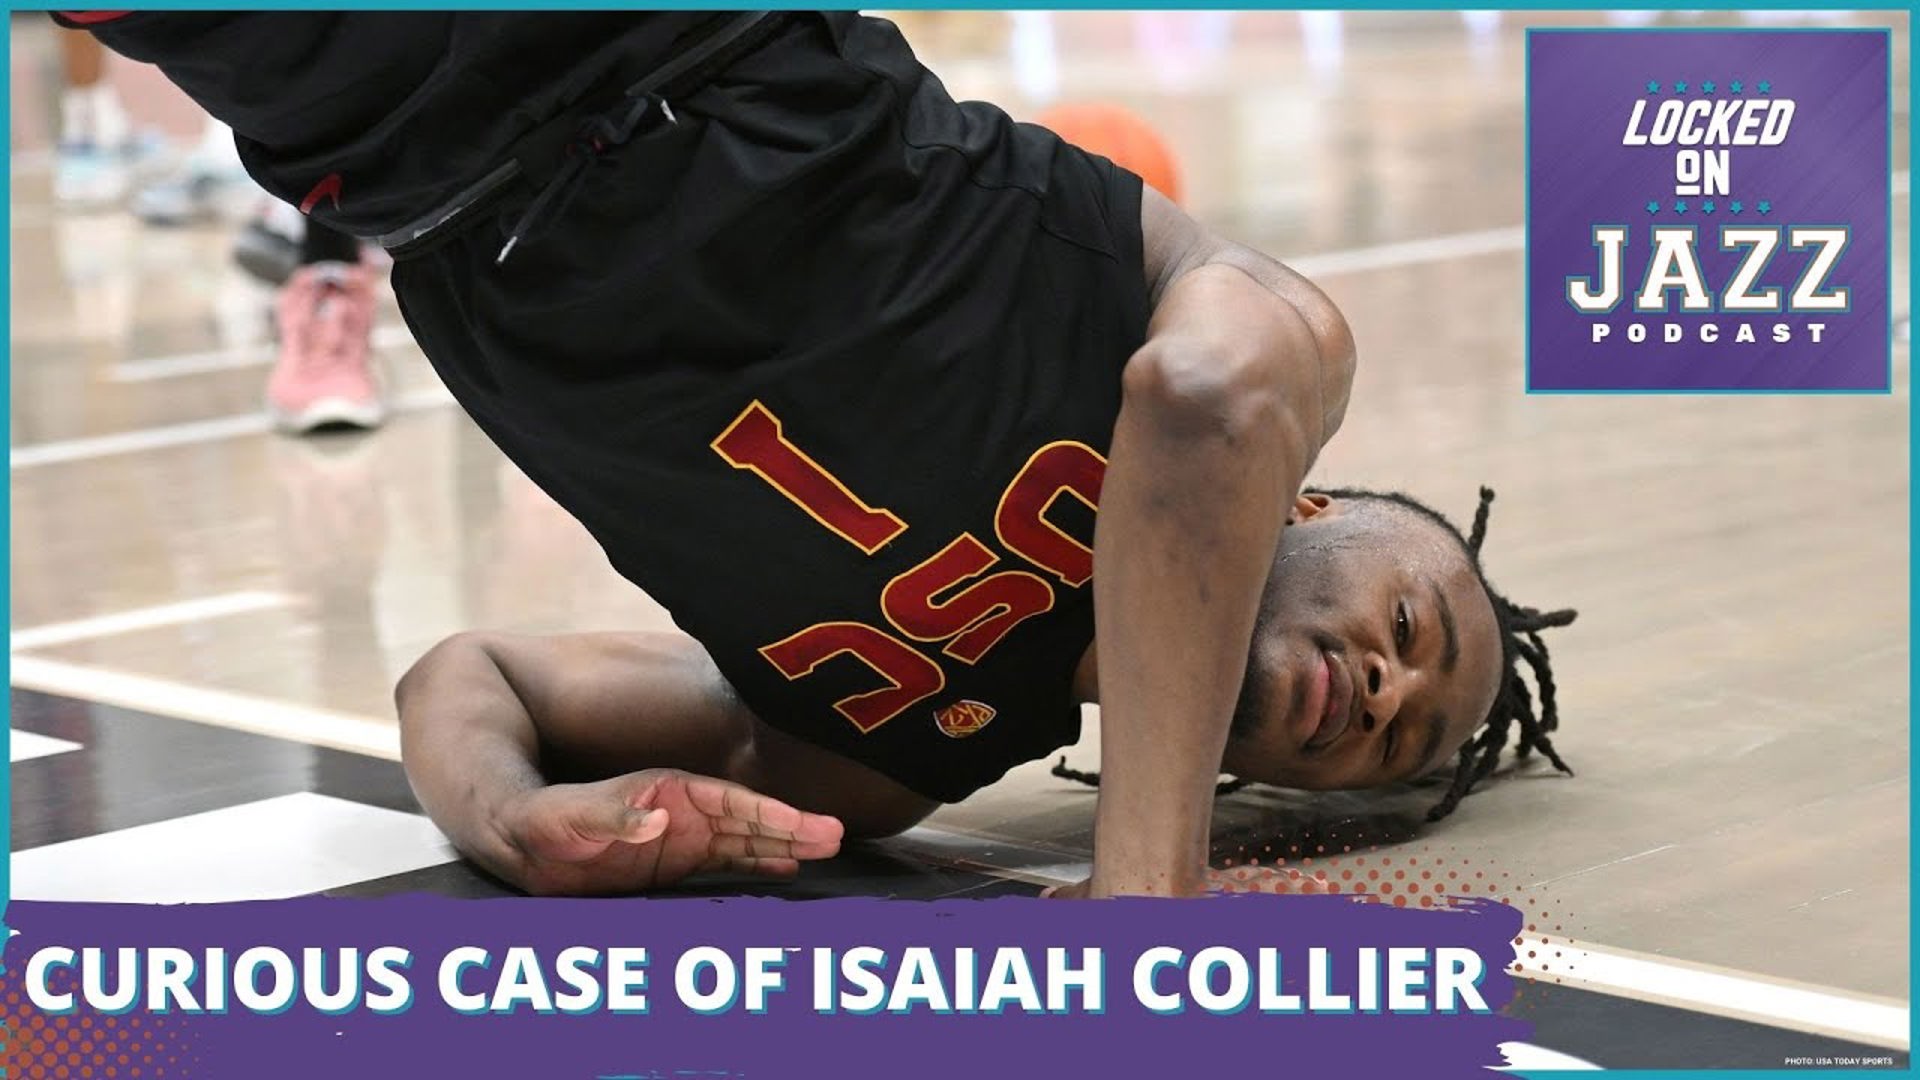 USC Guard Isaiah Collier was the #1 recruit in the country and is now projected to drop as far as 18th in the NBA Draft.